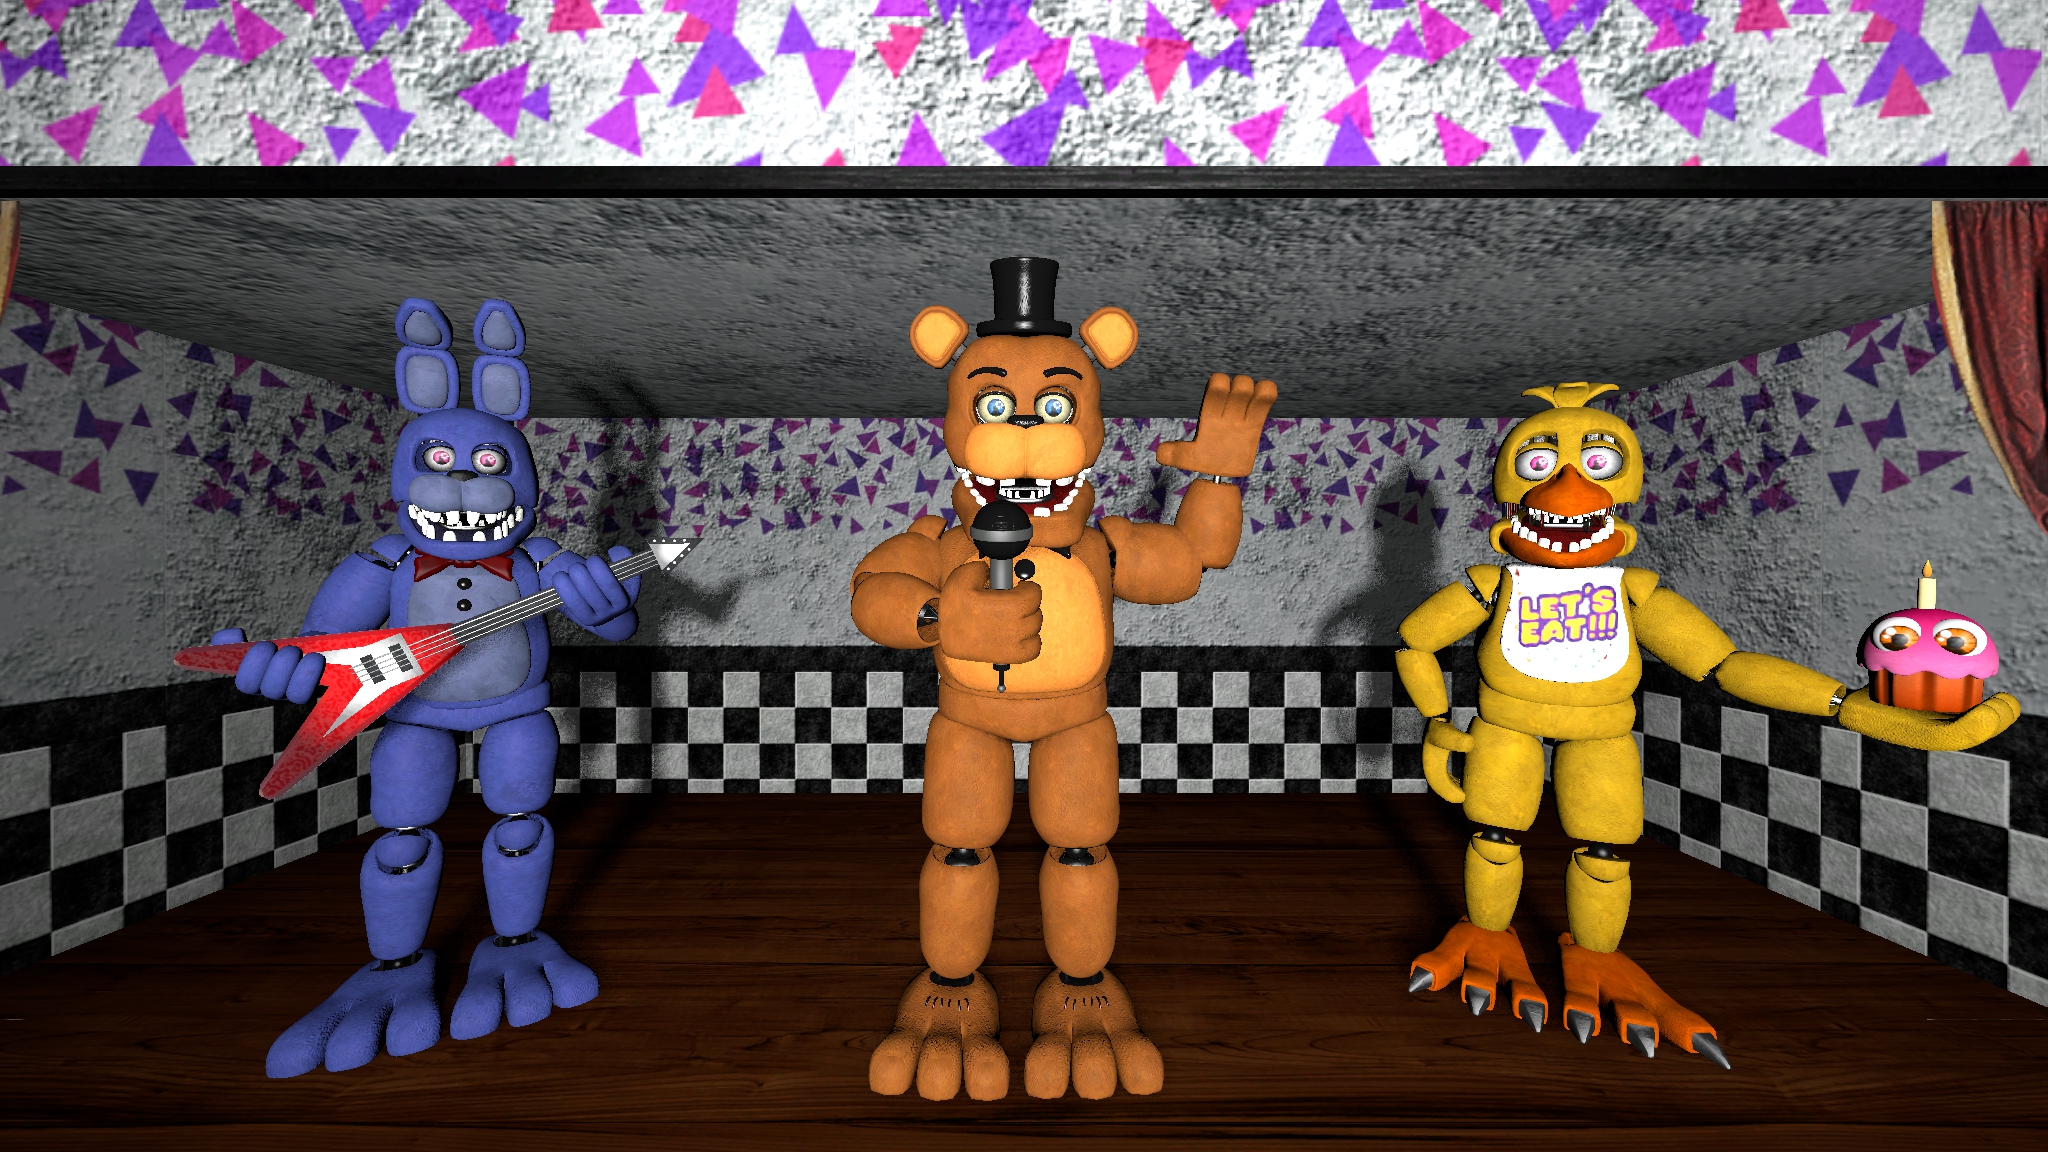 FNaF 1 stage with the unwithereds by GhostAlpha107 on DeviantArt